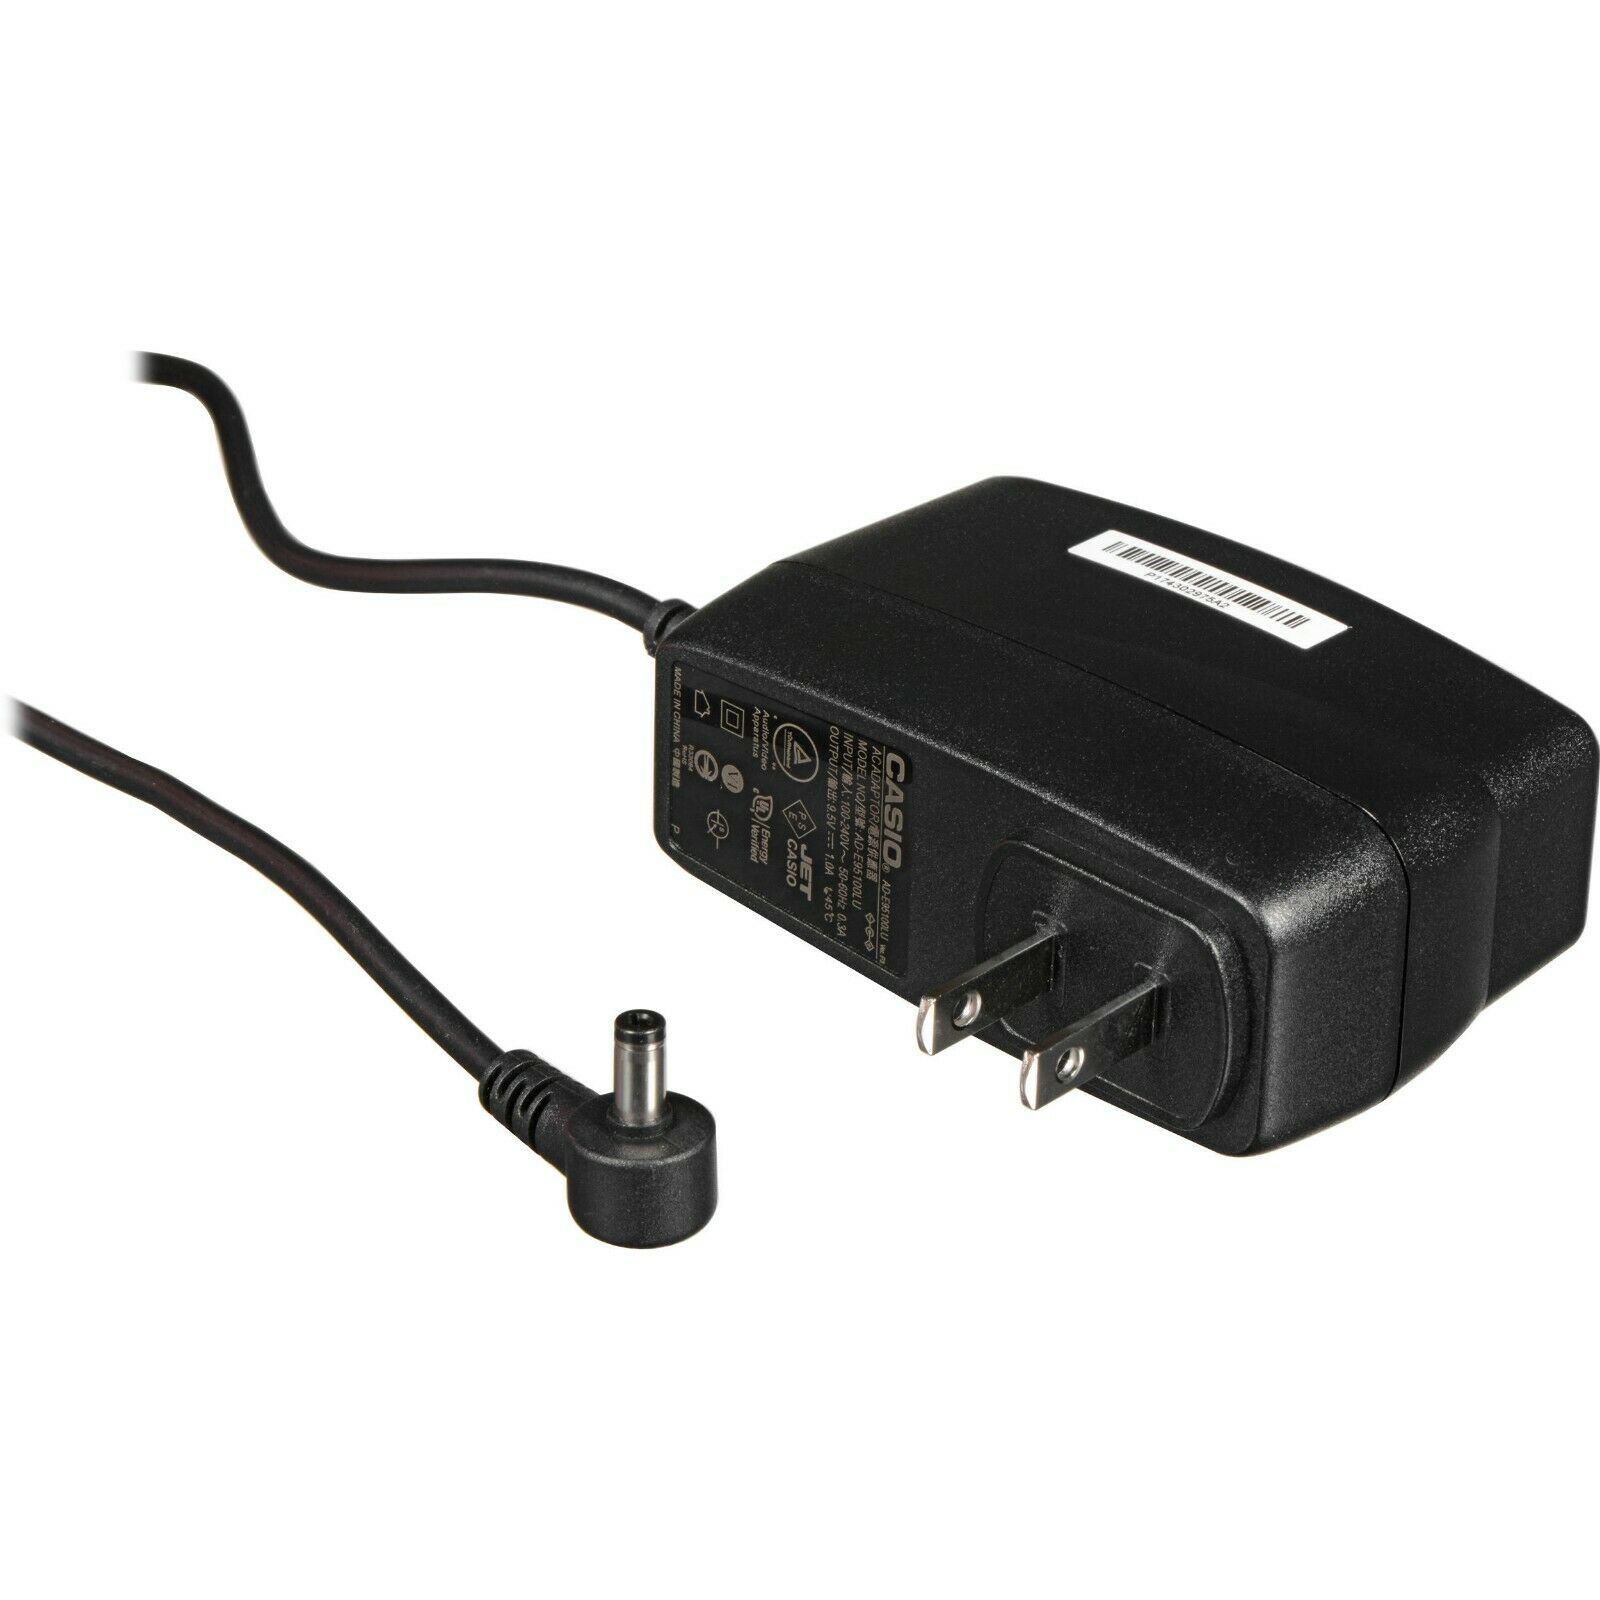 TDS Trimble TSC2 5V 4A AC/DC Adapter For International Power Supply Battery Charger AC Adapter/Charger: Brand New Out